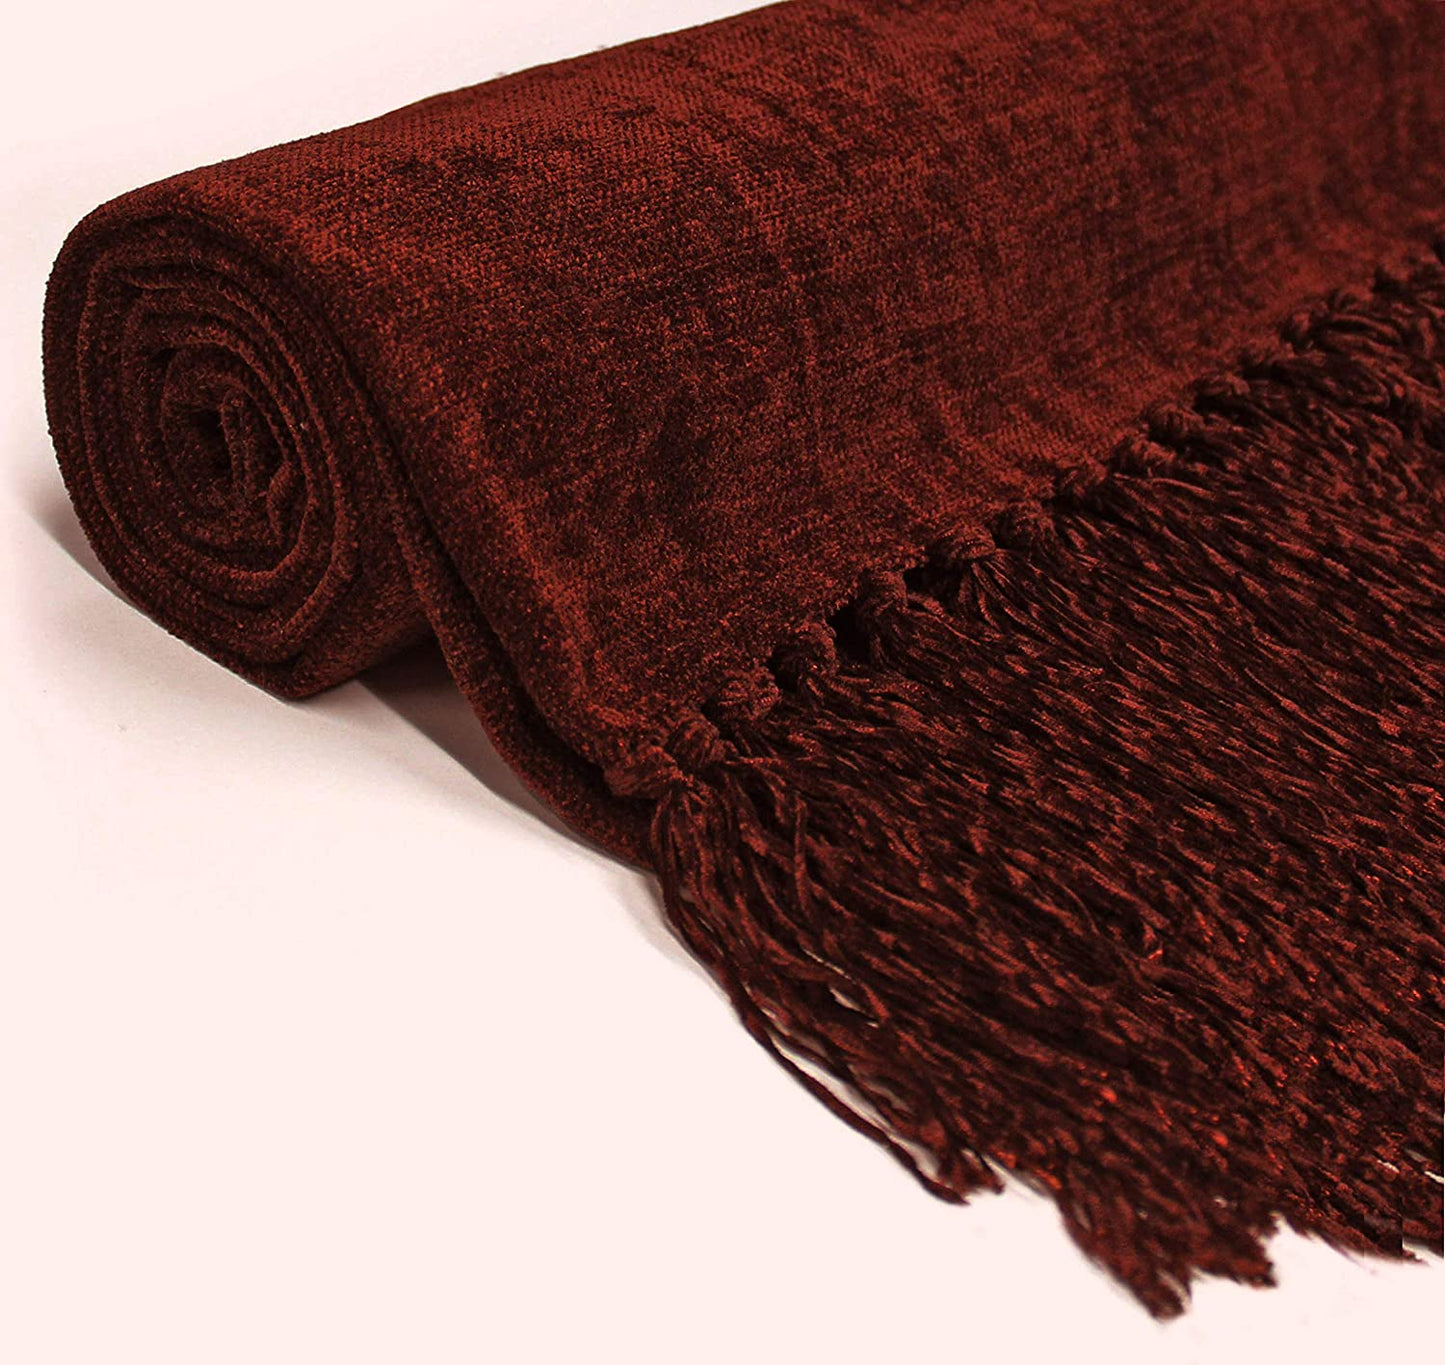 Loomsmith-Soft-Chenille-Throw-For-Sofa-of-maroon-color-with-beautiful-tassels-for-sofa-elegant-look